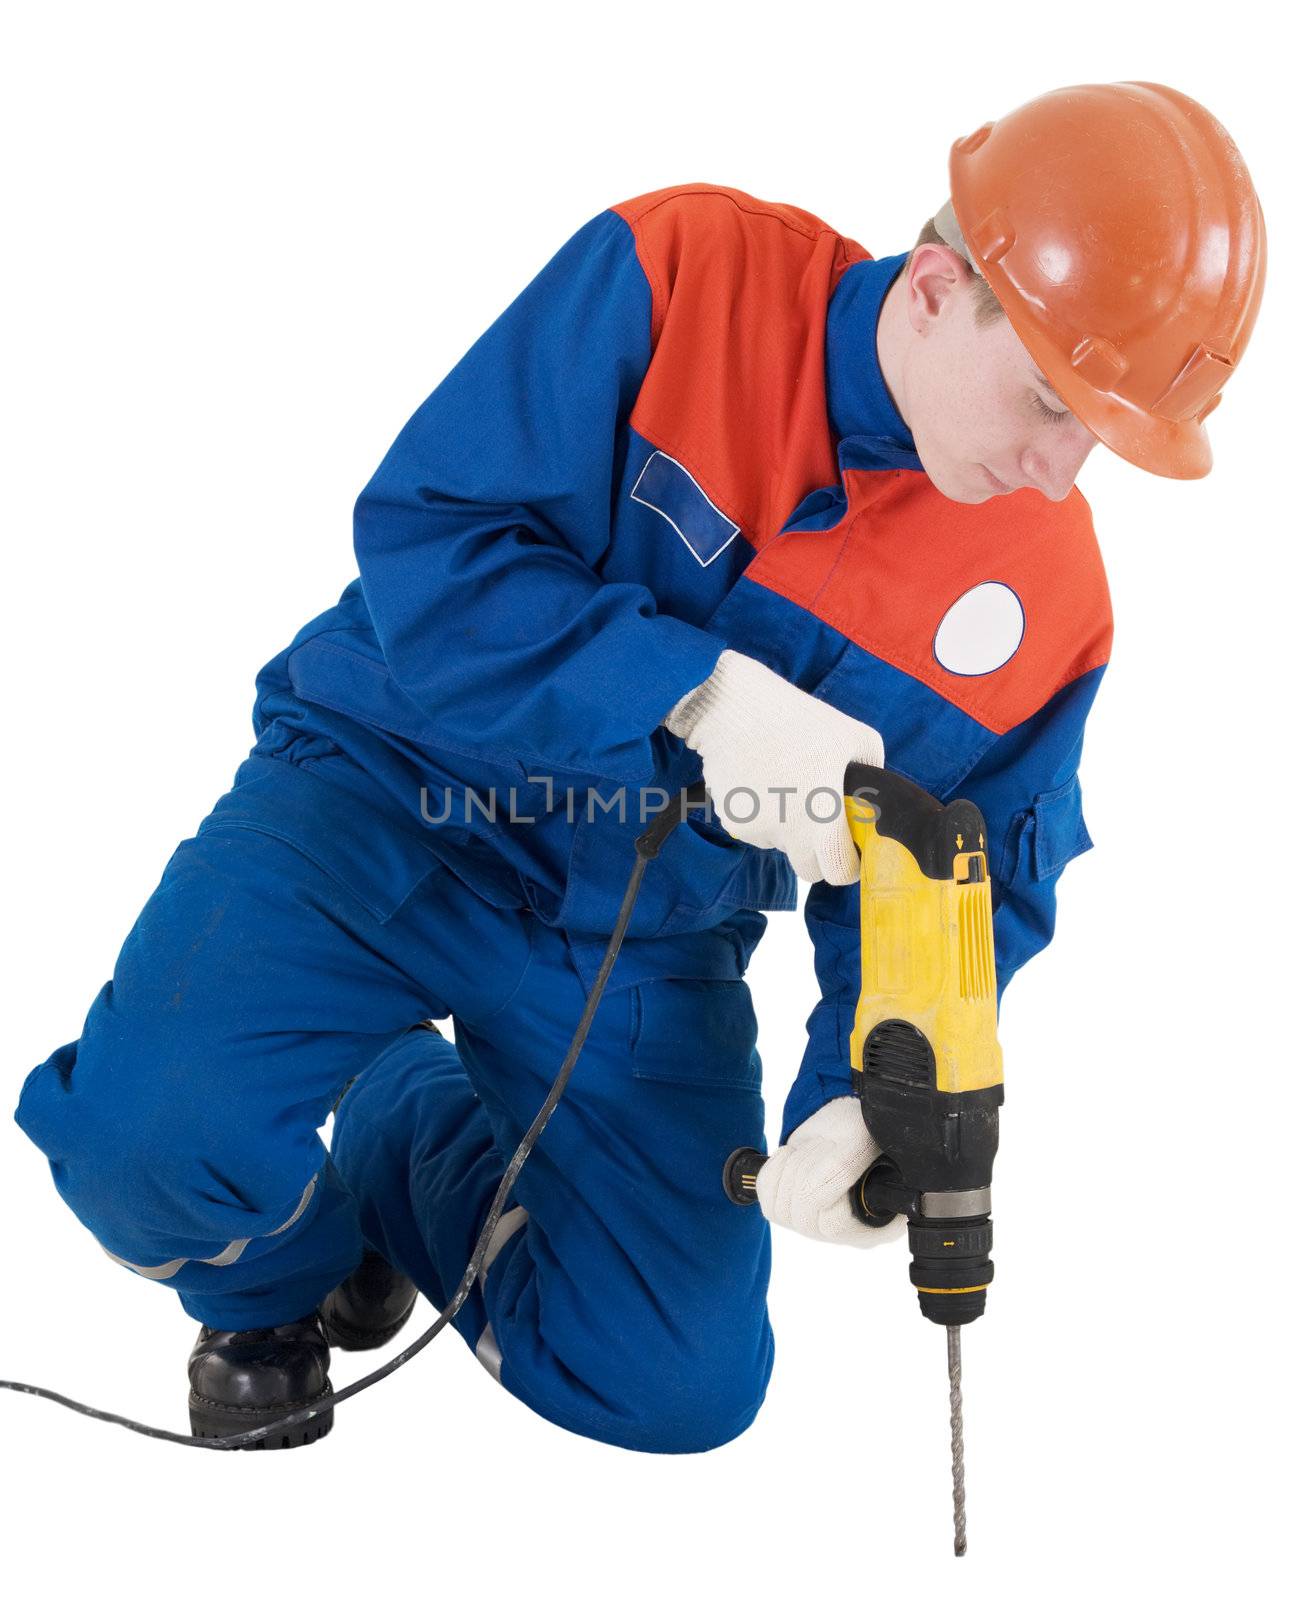 Labourer on the helmet with hand yellow drill